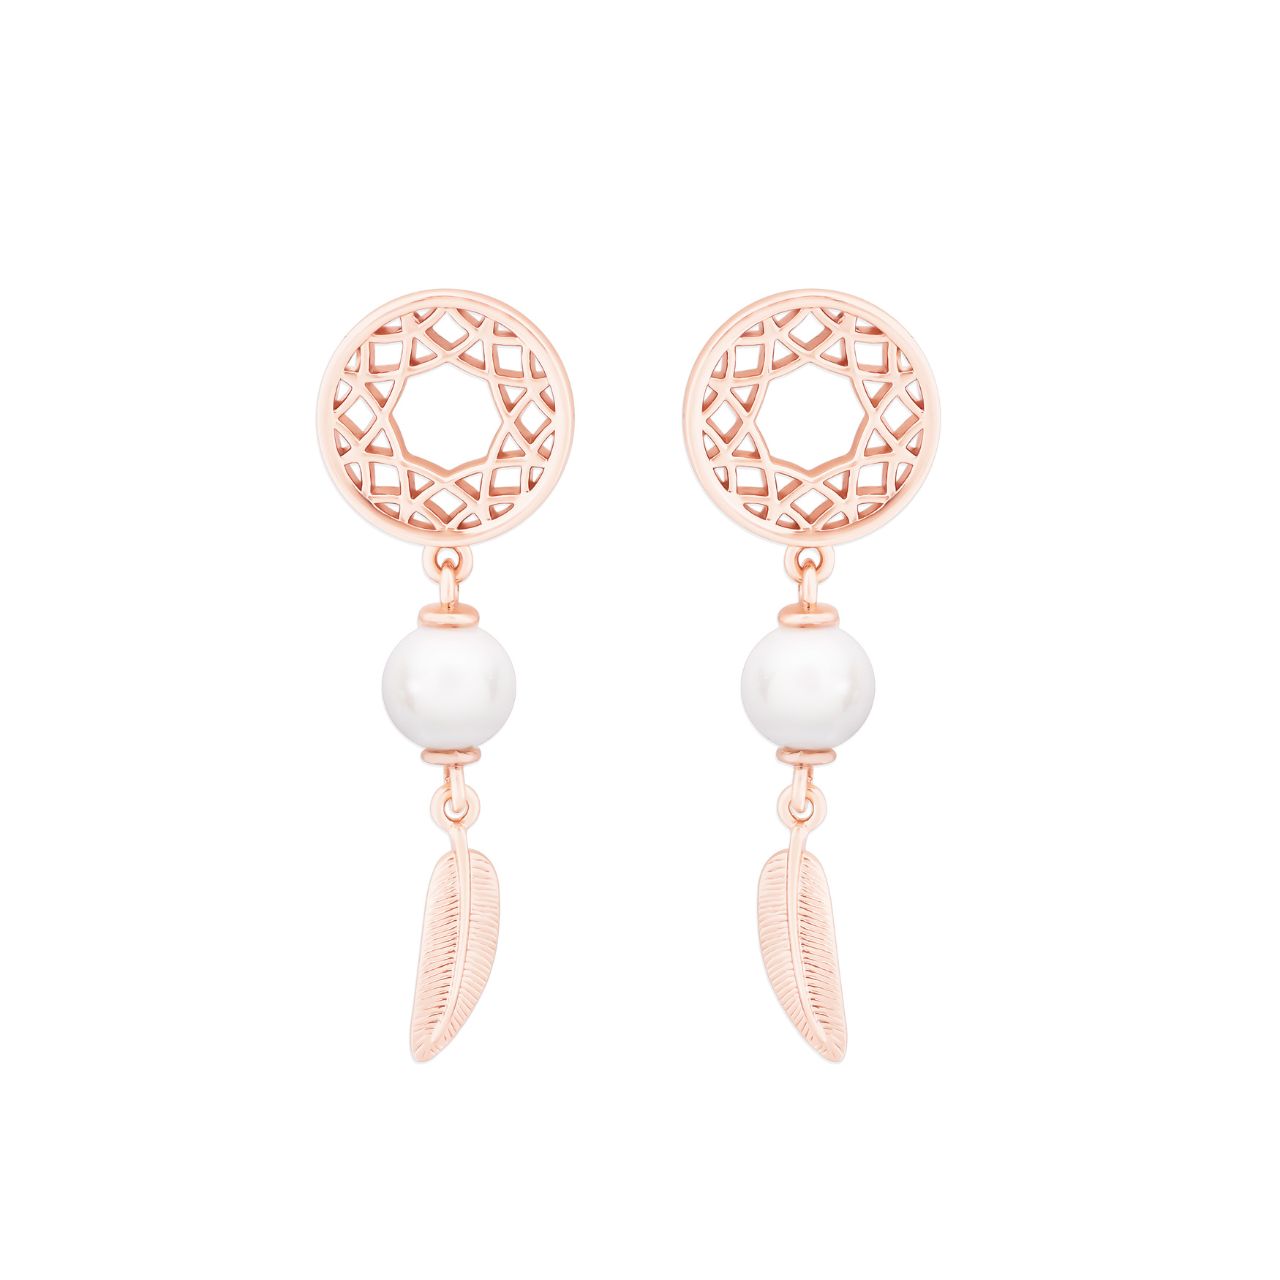 Feather & Pearl Boho Earrings Rose Gold by Tipperary  These elegant Feather & Pearl Boho Earrings Rose Gold from Tipperary are the perfect way to show off your unique style. Crafted with a timeless design, they feature stunning rose gold hardware and beautiful pearl and feather details to add a touch of classic glamour to your look.